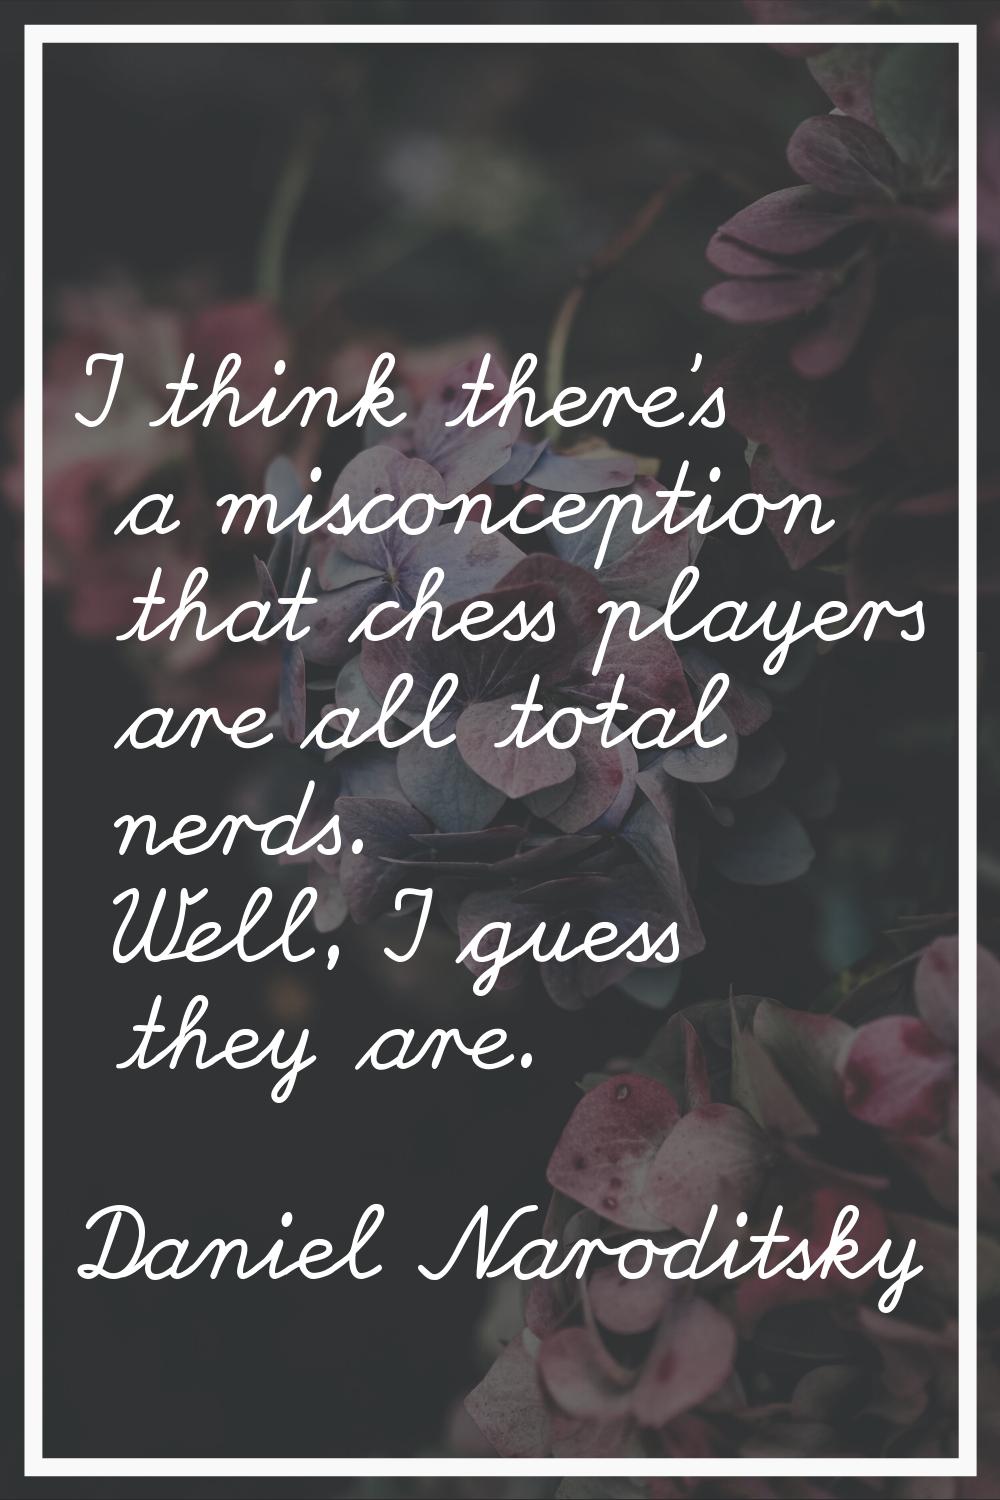 I think there's a misconception that chess players are all total nerds. Well, I guess they are.